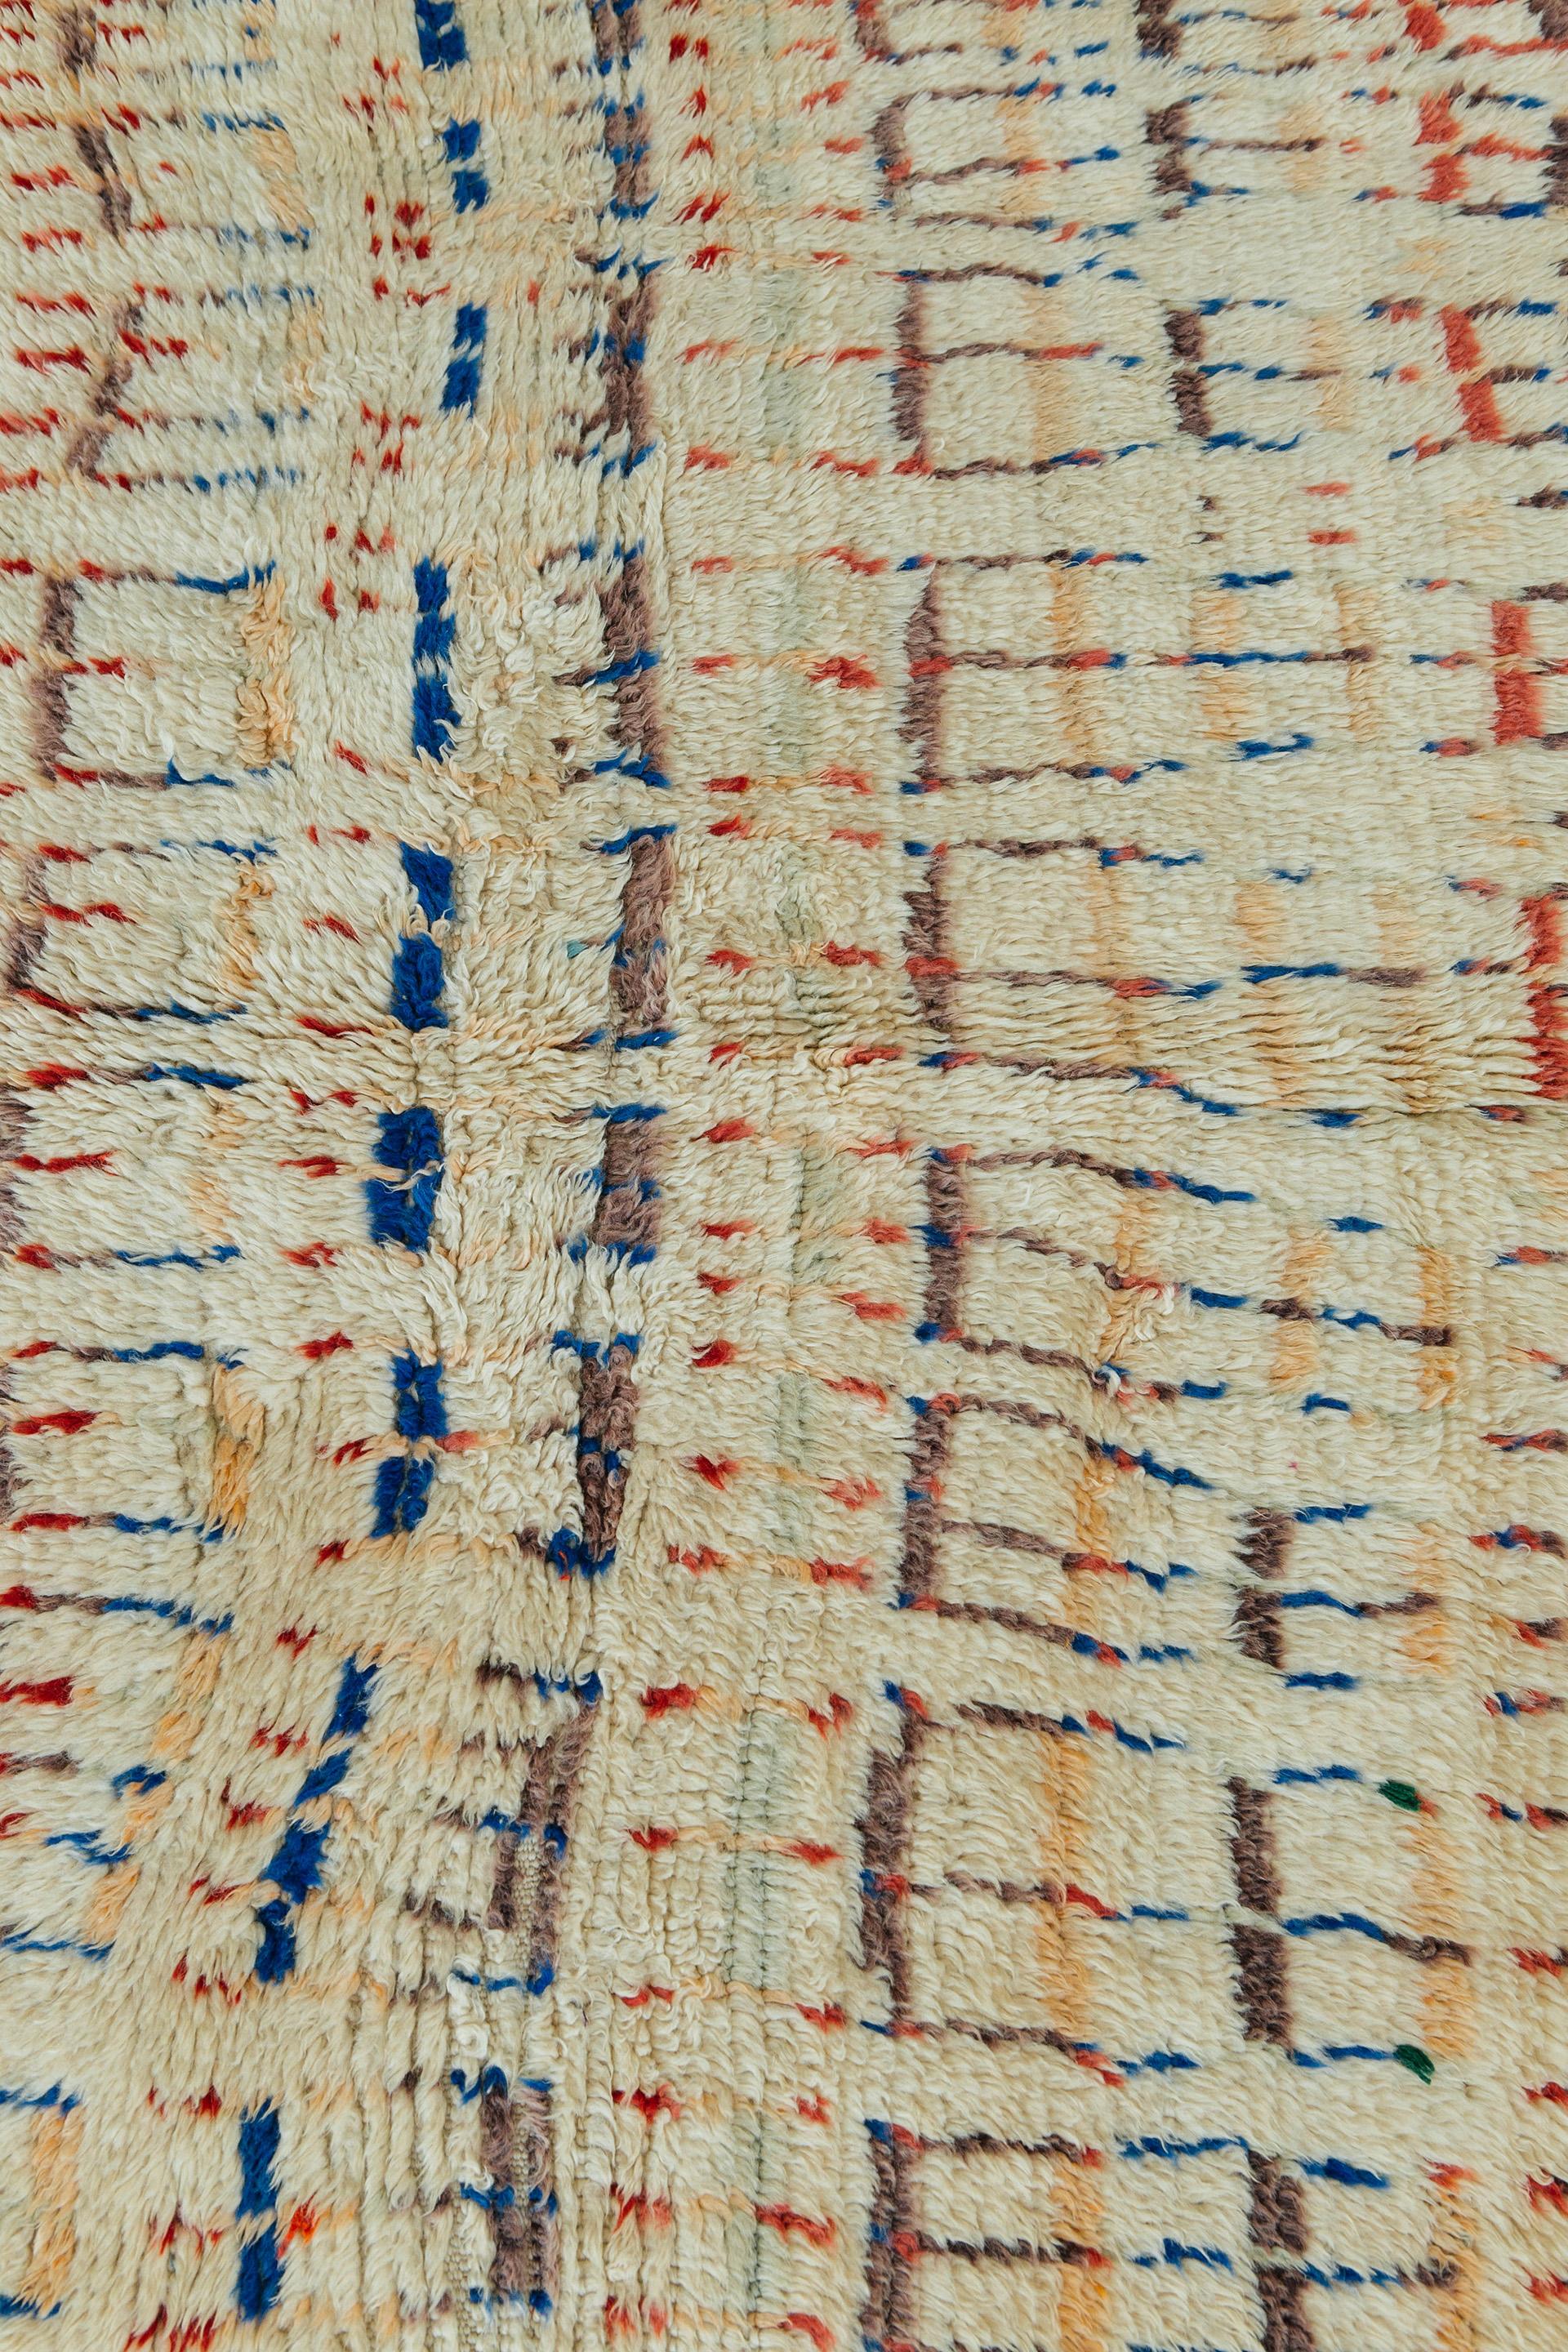 This is a one of a kind vintage Moroccan rug from the Beni Ourian Tribe. Colorful geometric motifs make this shag rug a unique and interesting piece. The neutral geometric look that Beni Ourian rugs are known for blend beautifully with the clean